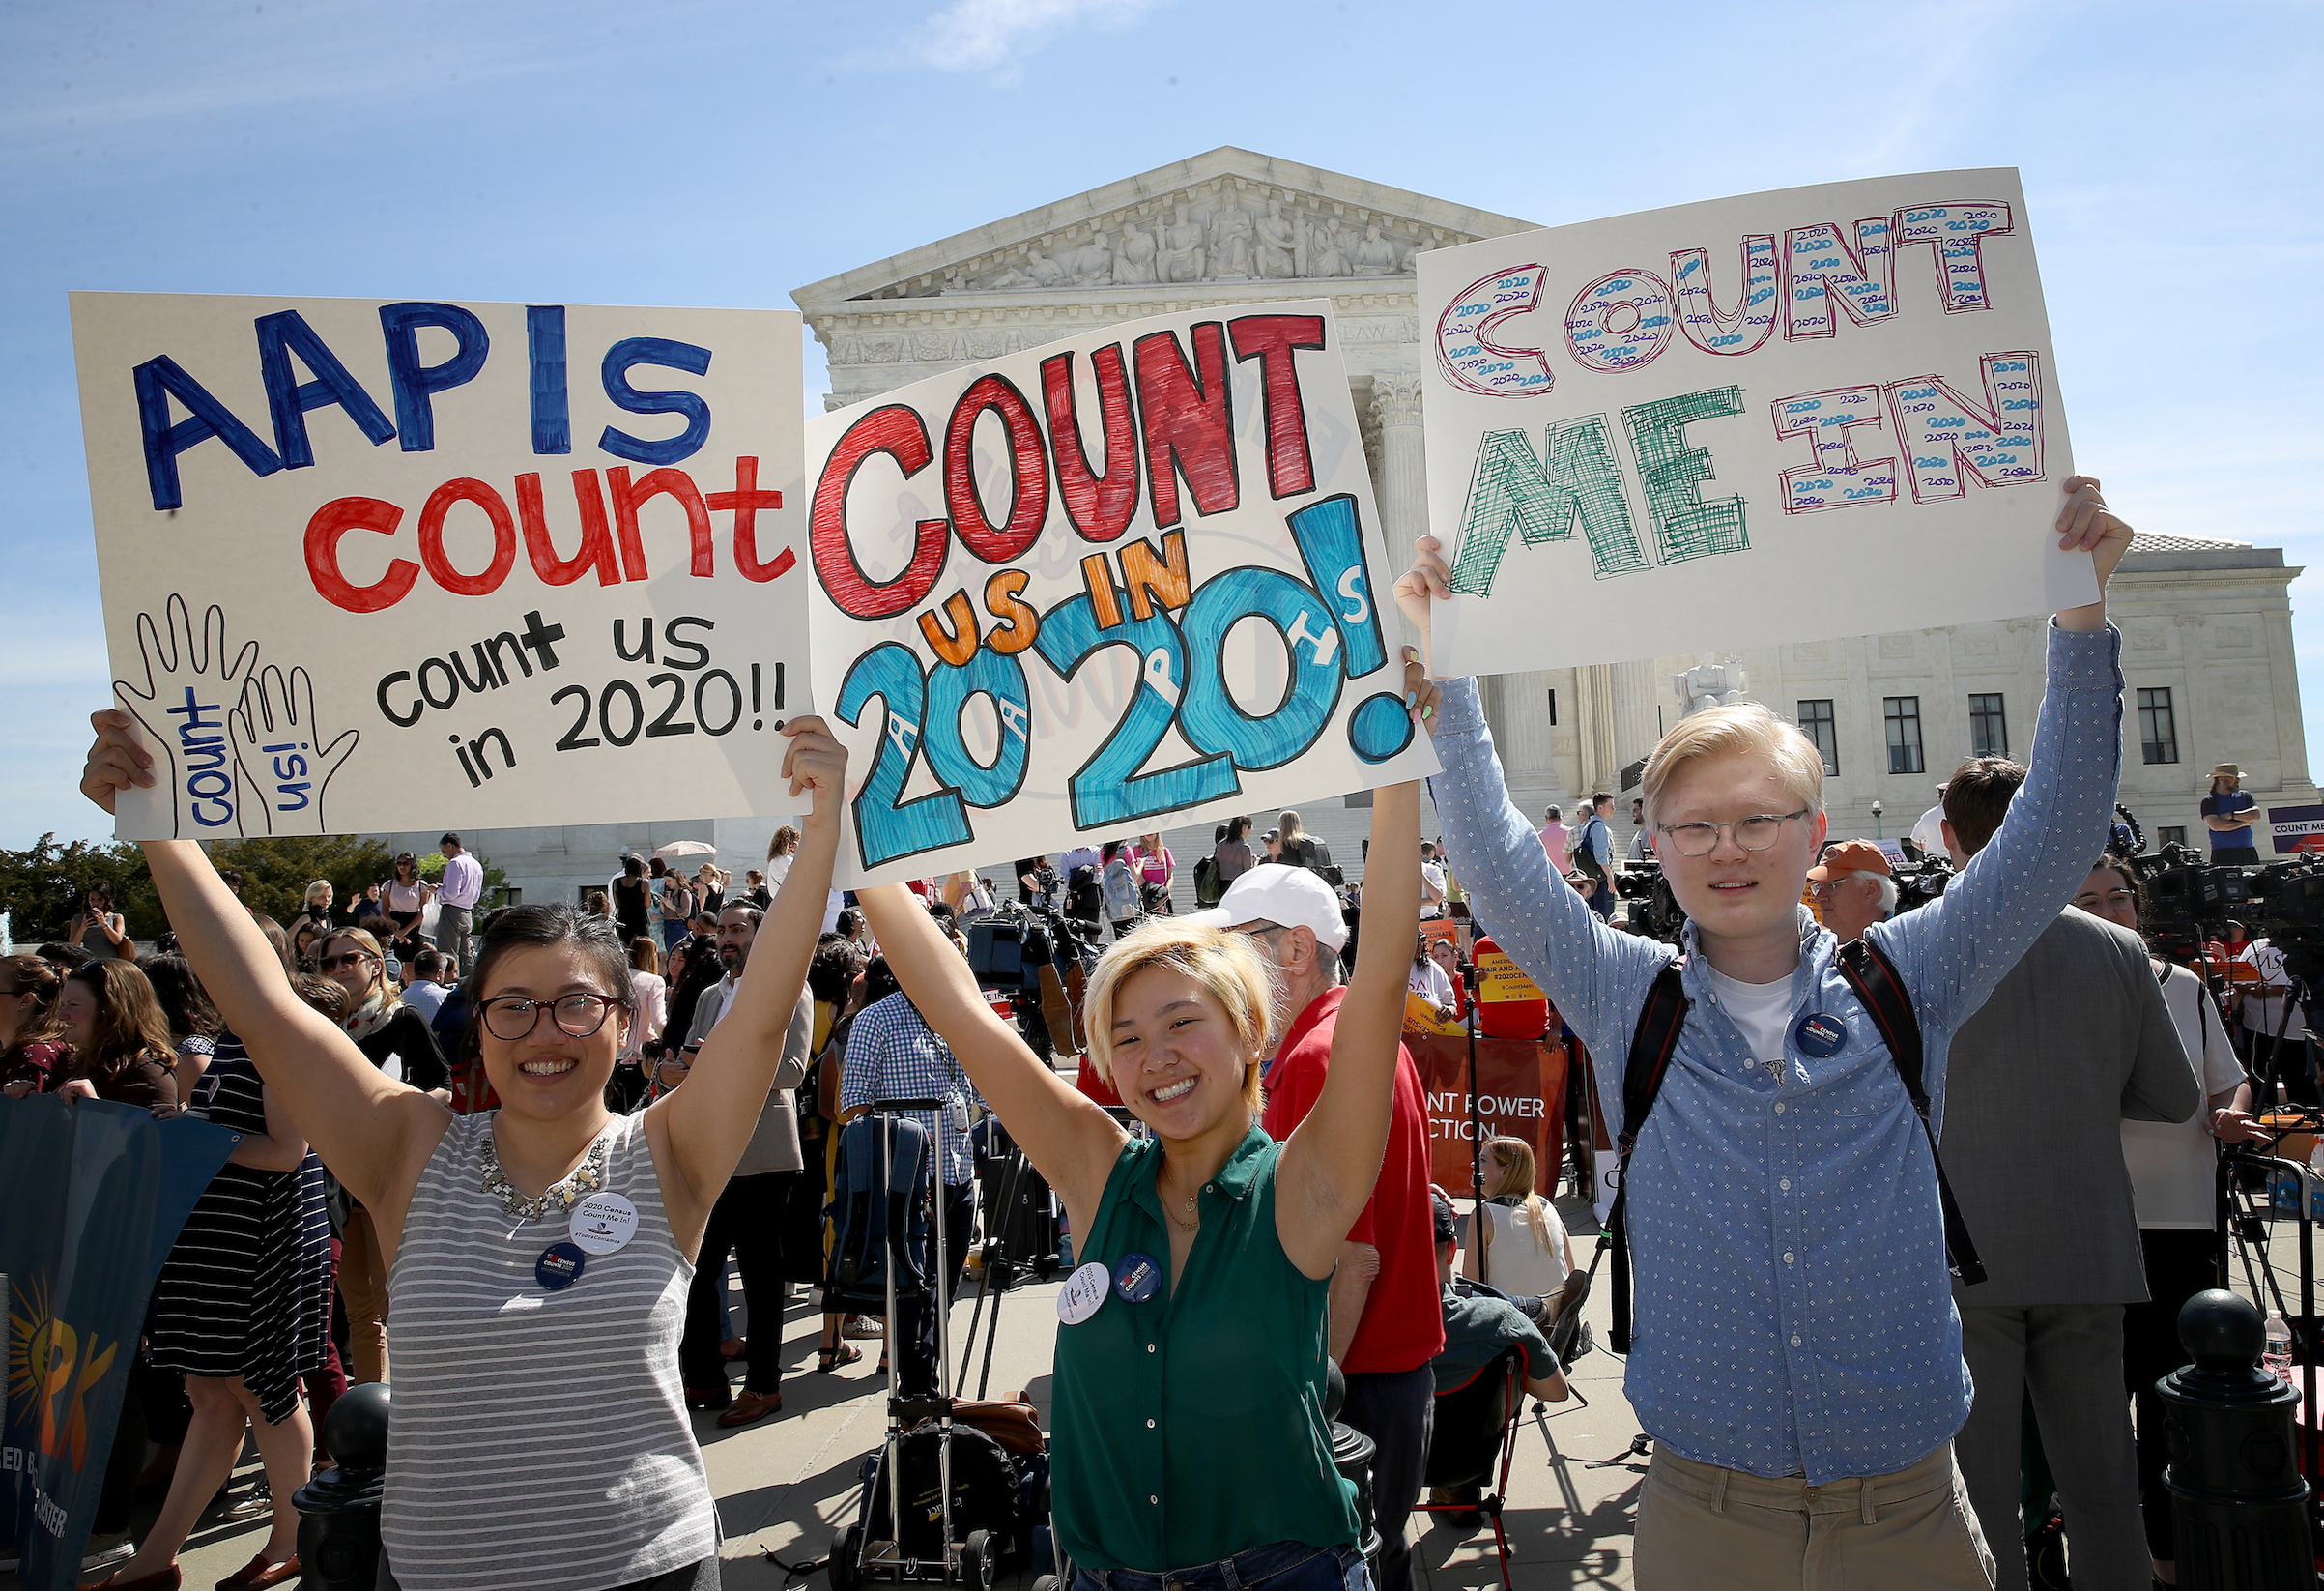 Protesters gather outside the U.S. Supreme Court as the court hears oral arguments in a Census-related case on April 23, 2019 in Washington, D.C. (Getty Images)